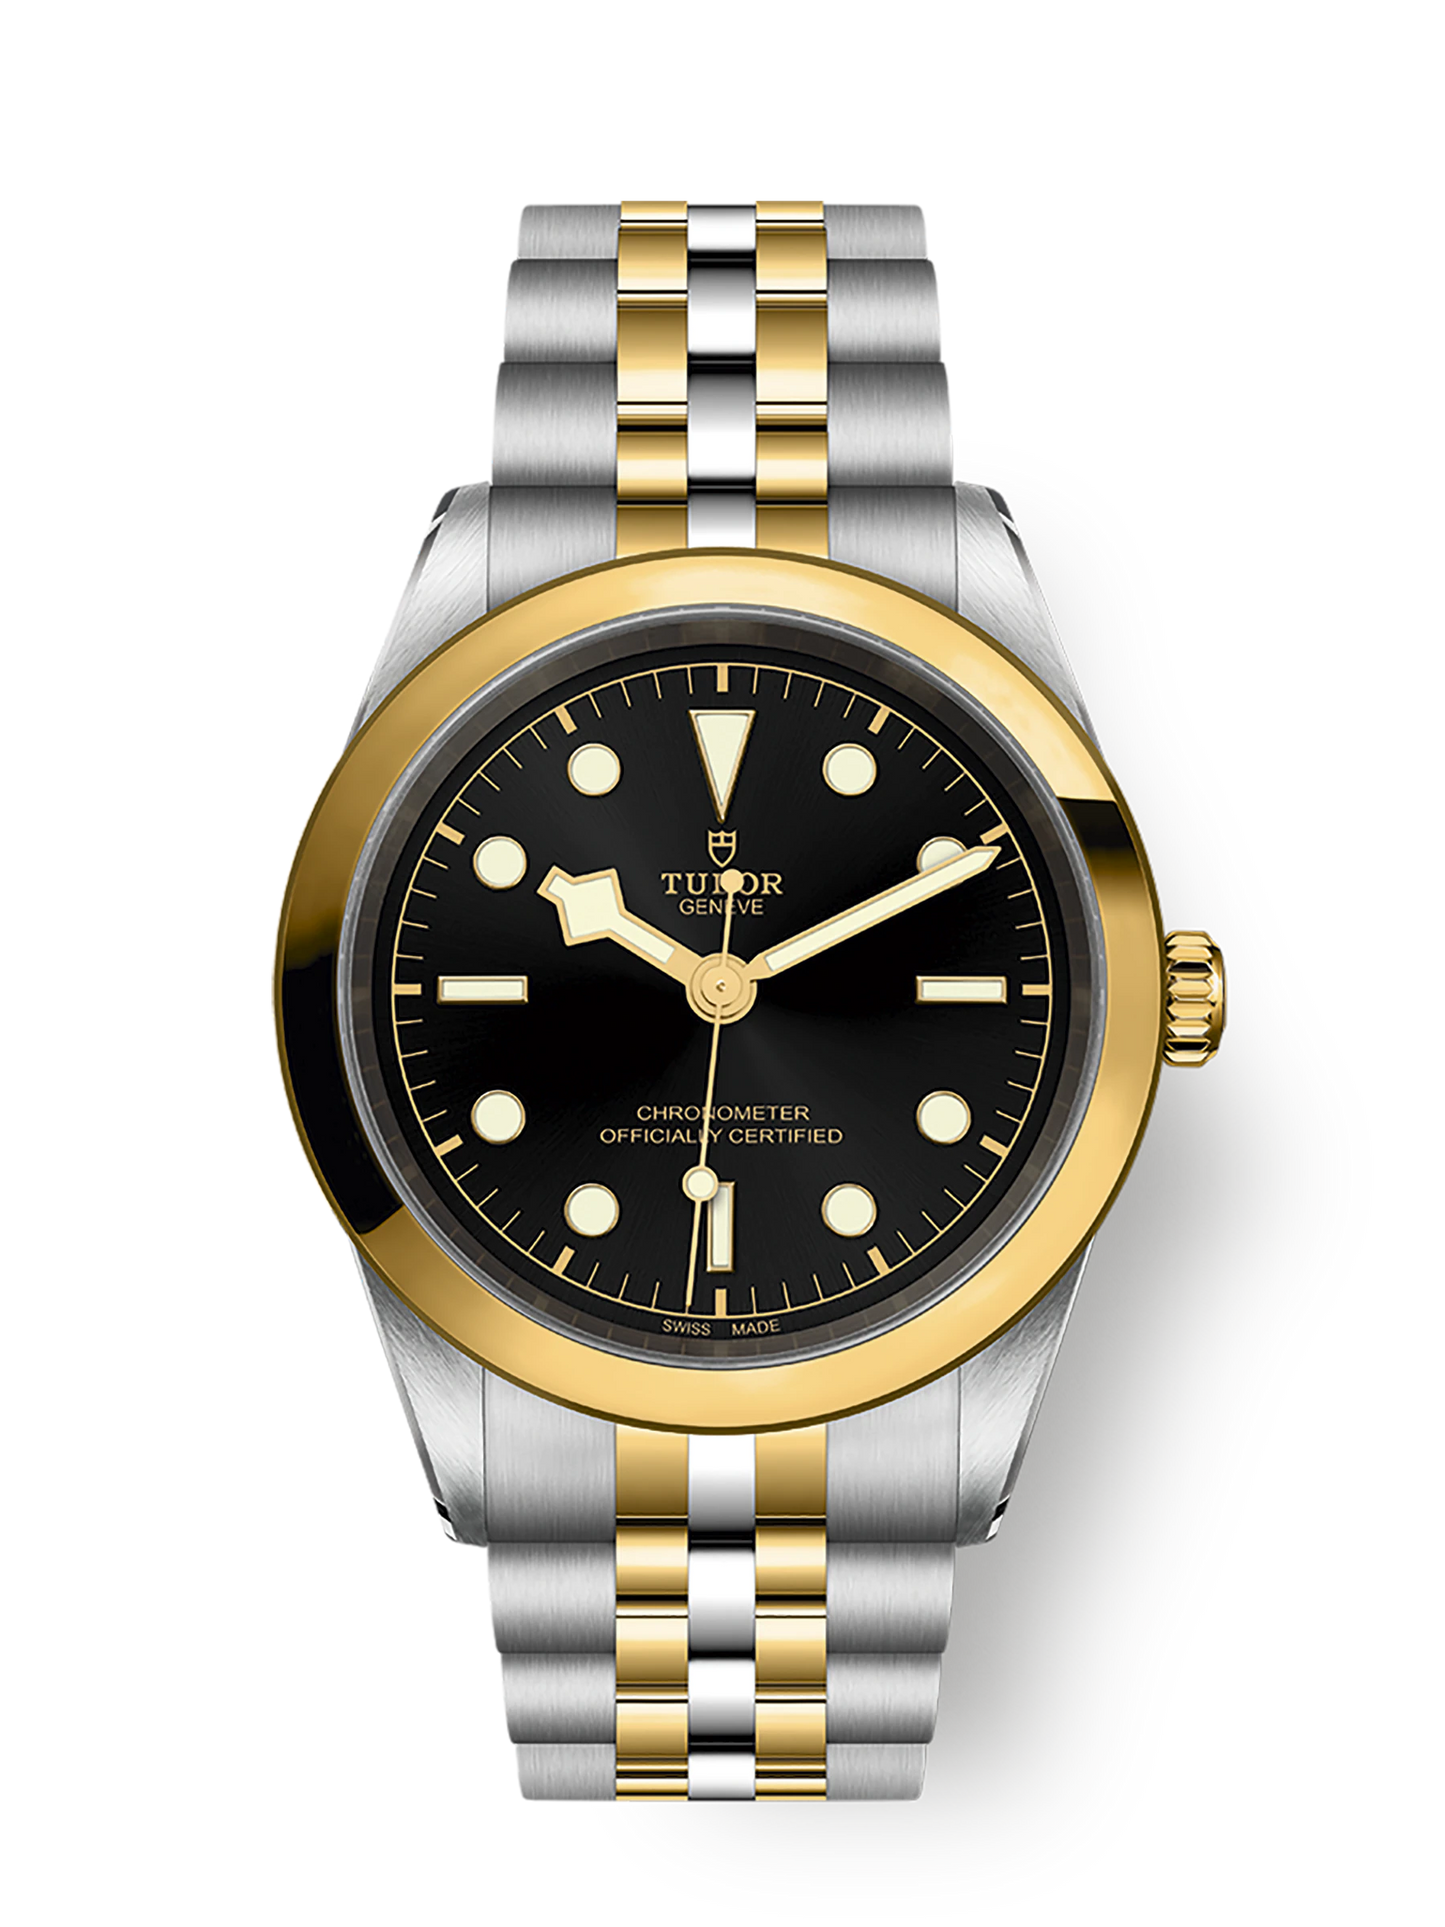 Tudor Black Bay 41 S&G, Stainless Steel and 18k Yellow Gold, Ref# M79683-0001